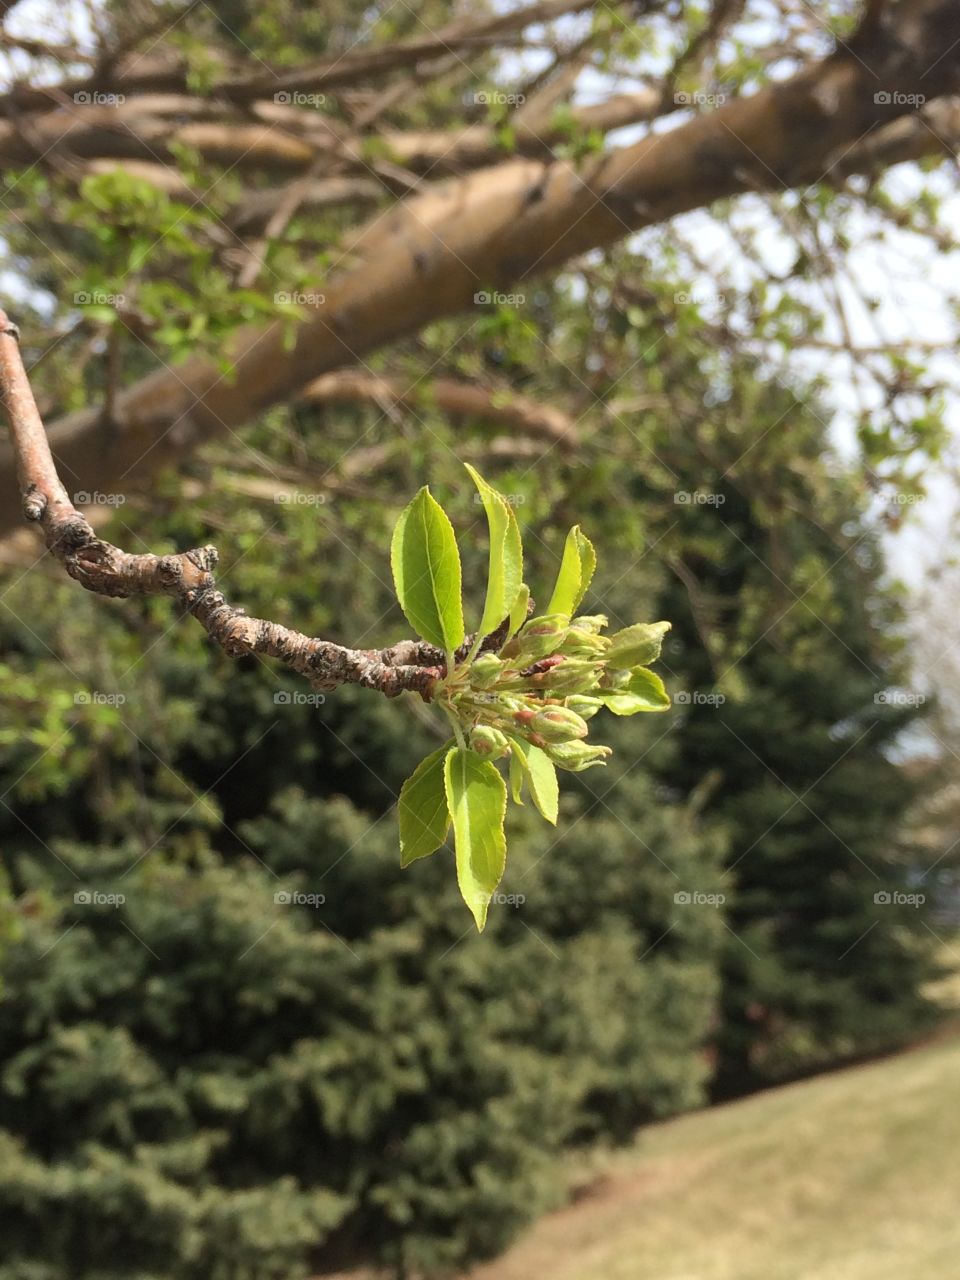 Springtime in the mile high. Tree growing leaves